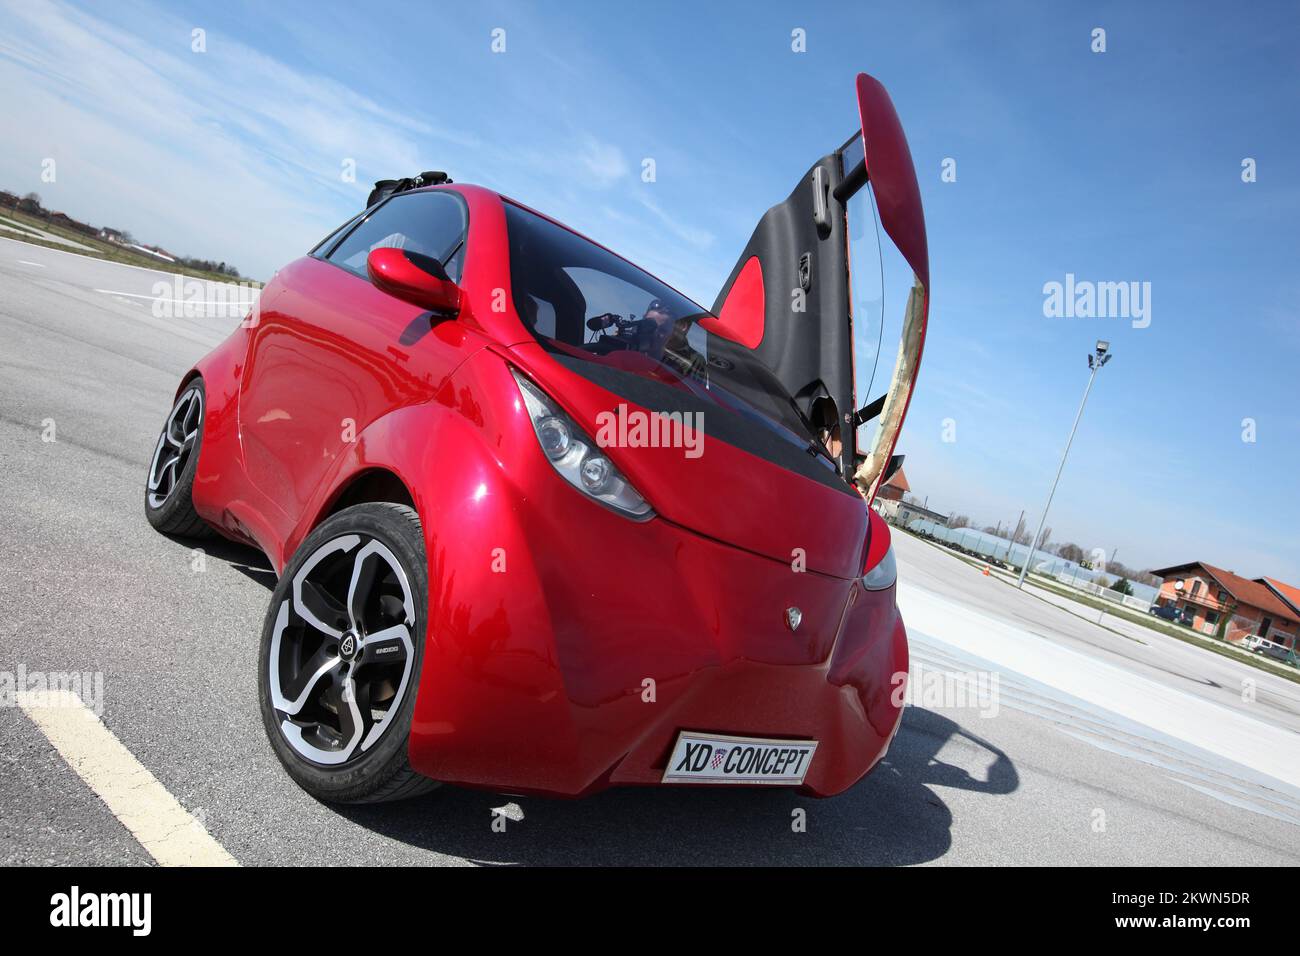 Croatia as the 28th EU Member State - Doking XD car The first Croatian  electric car Doking XD was created in just two and a half months.  Lithium-iron-phosphate batteries allow autonomy of